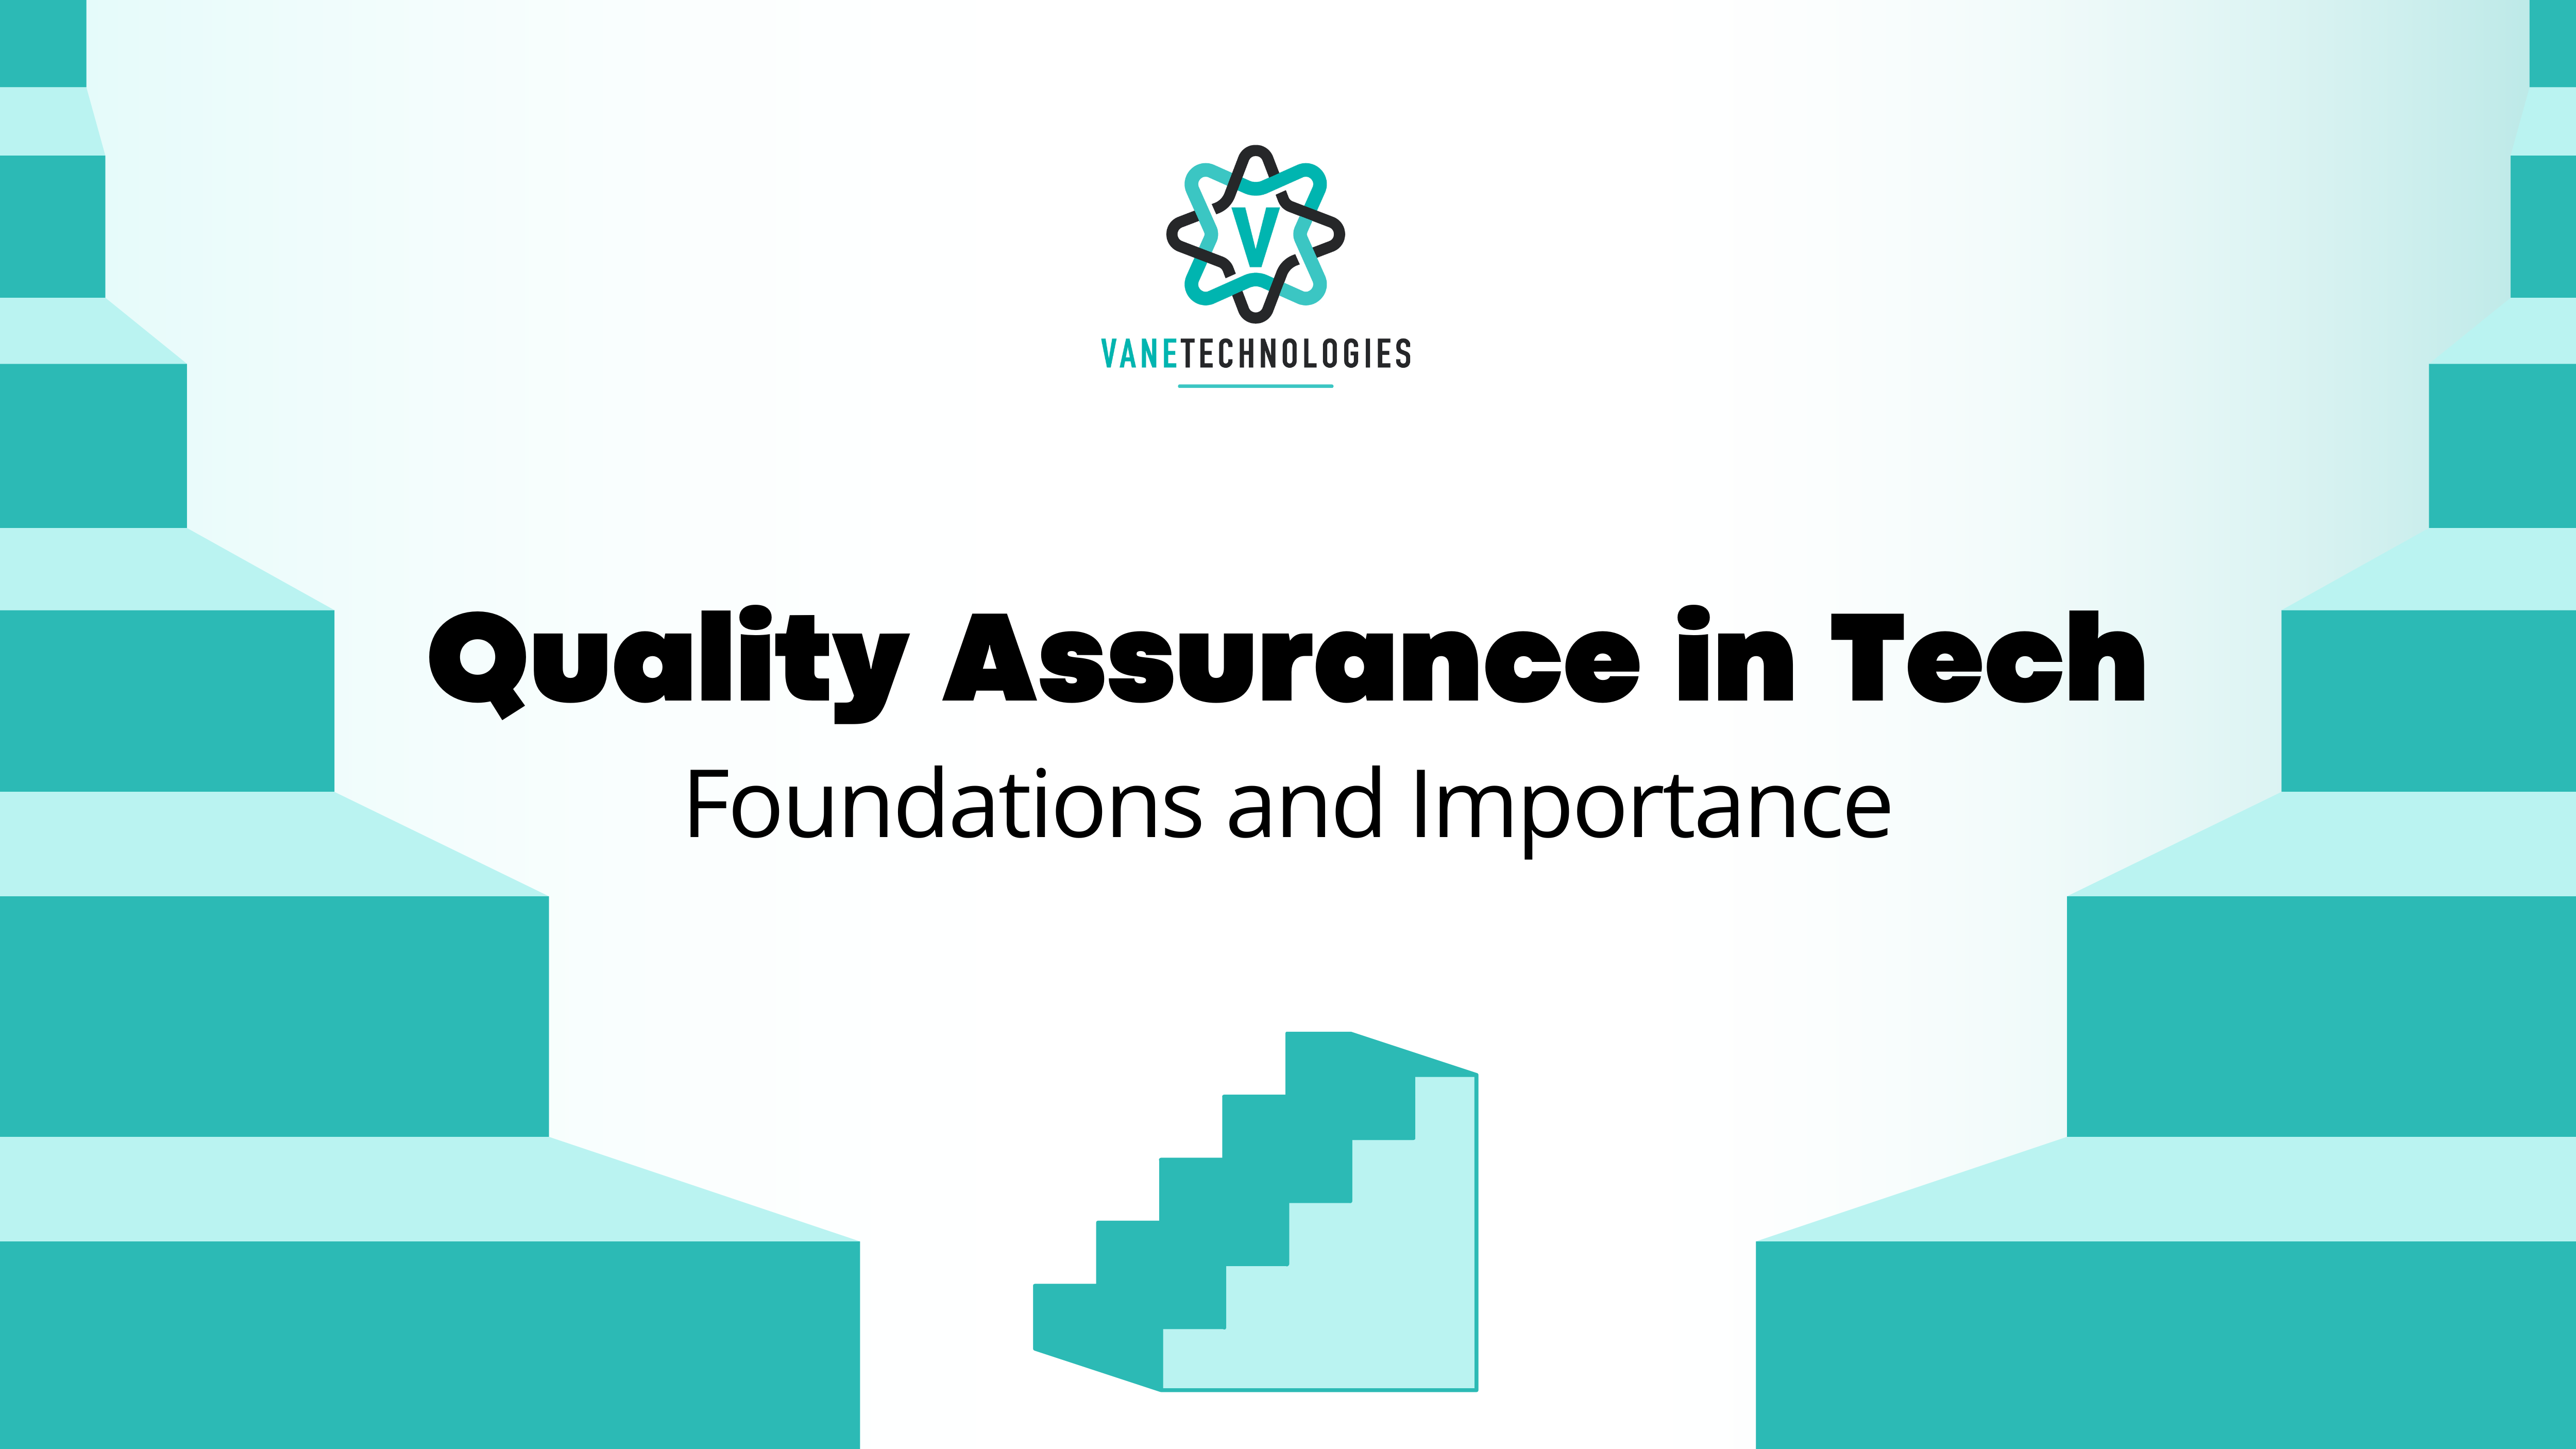 Quality Assurance in Tech: Foundations and Importance